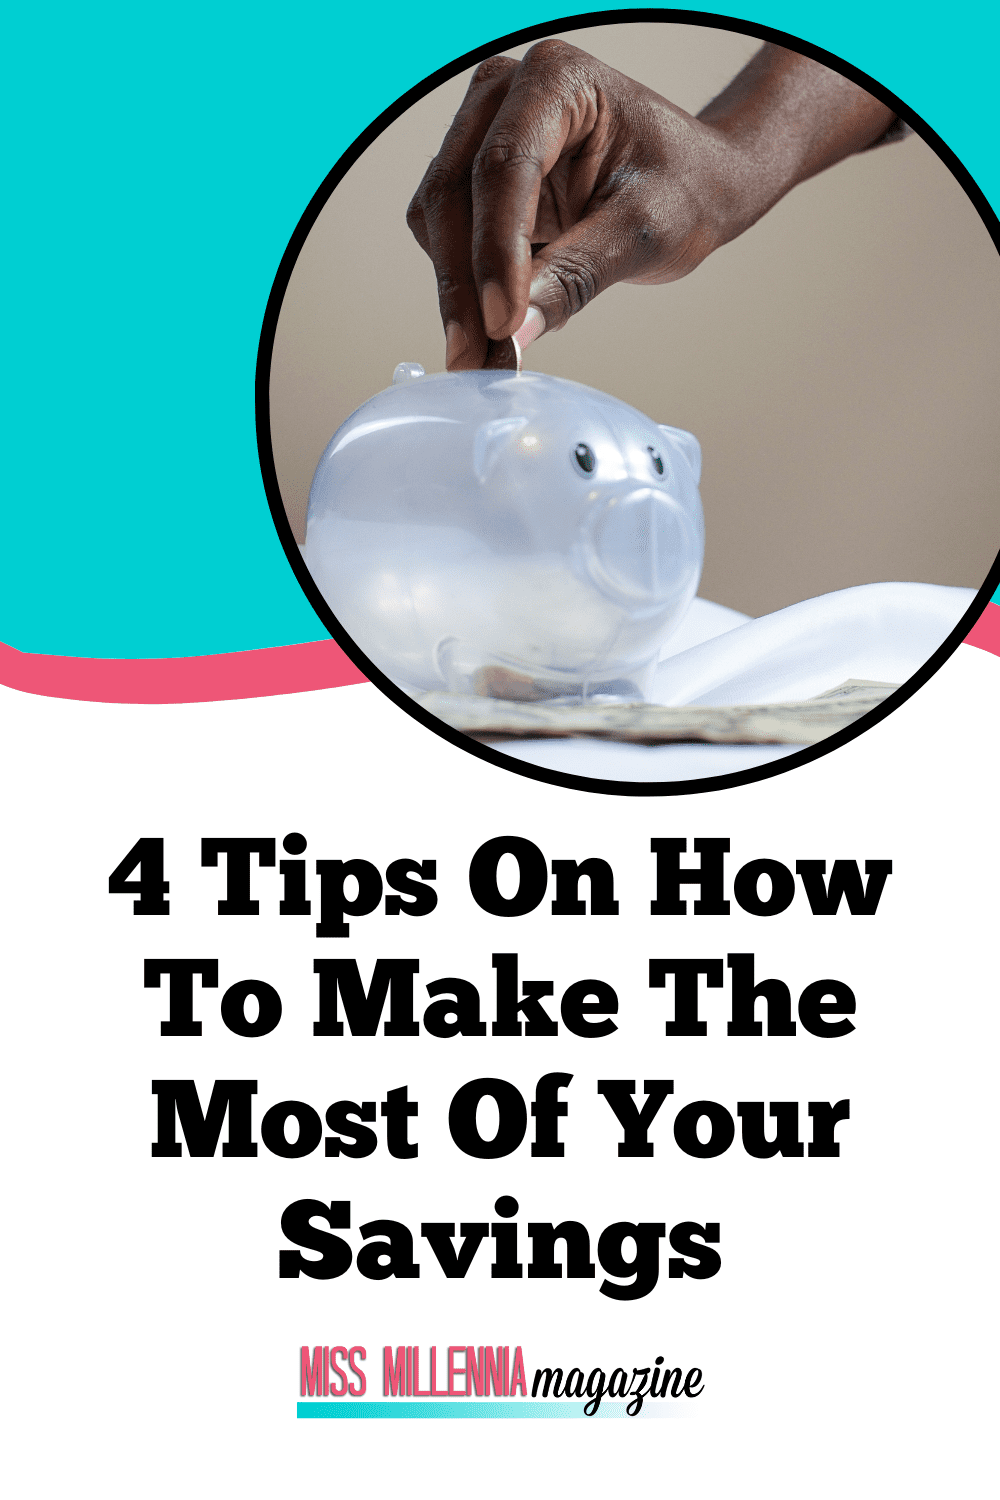 4 Tips On How To Make The Most Of Your Savings